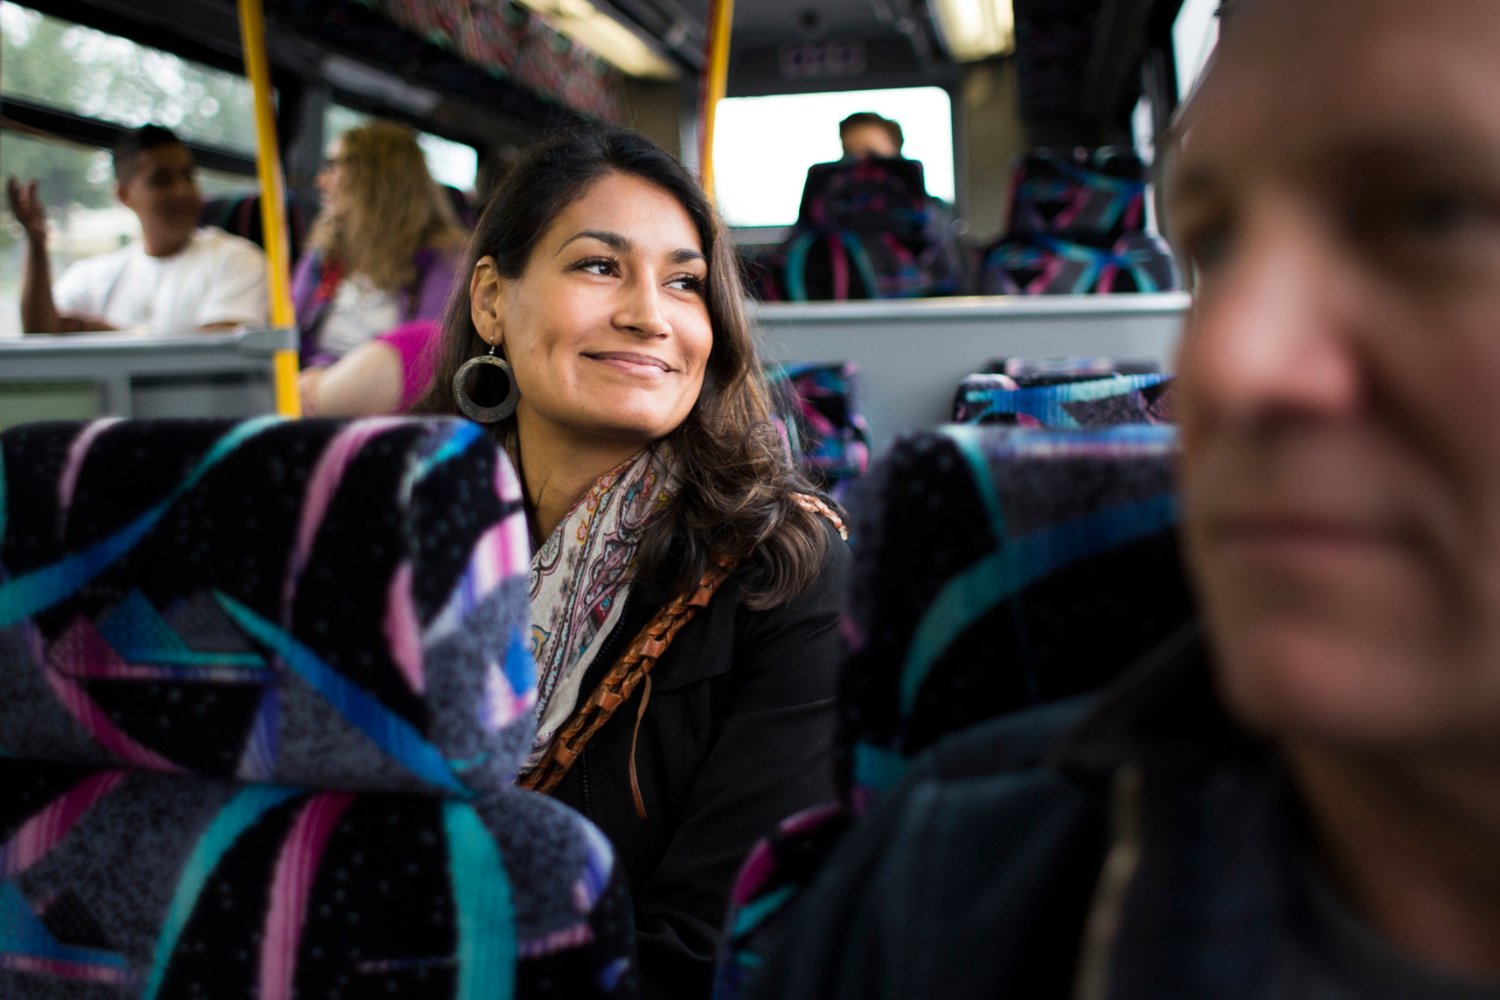 A woman riding the bus with a pleasant expression on her face.